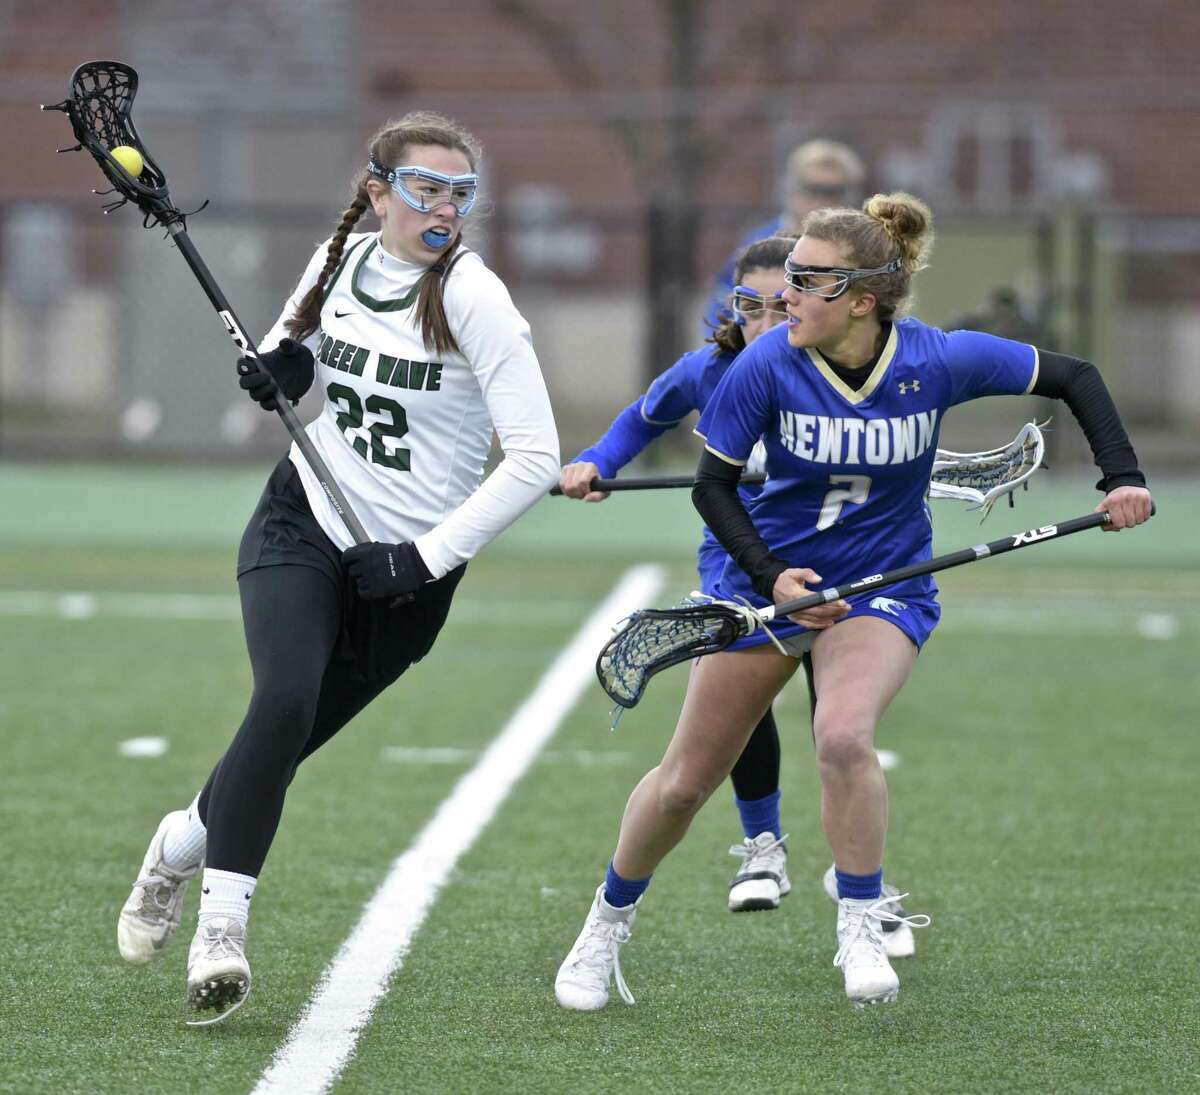 New Milford's Olivia Taub (22) moves the ball up field against Newtown's Cassidy Kortze (2) and Dylin Marano (44) in the girls lacrosse game between Newtown and New Milford high schools, Tuesday, April 17, 2018, at New Milford High School, New Milford, Conn.